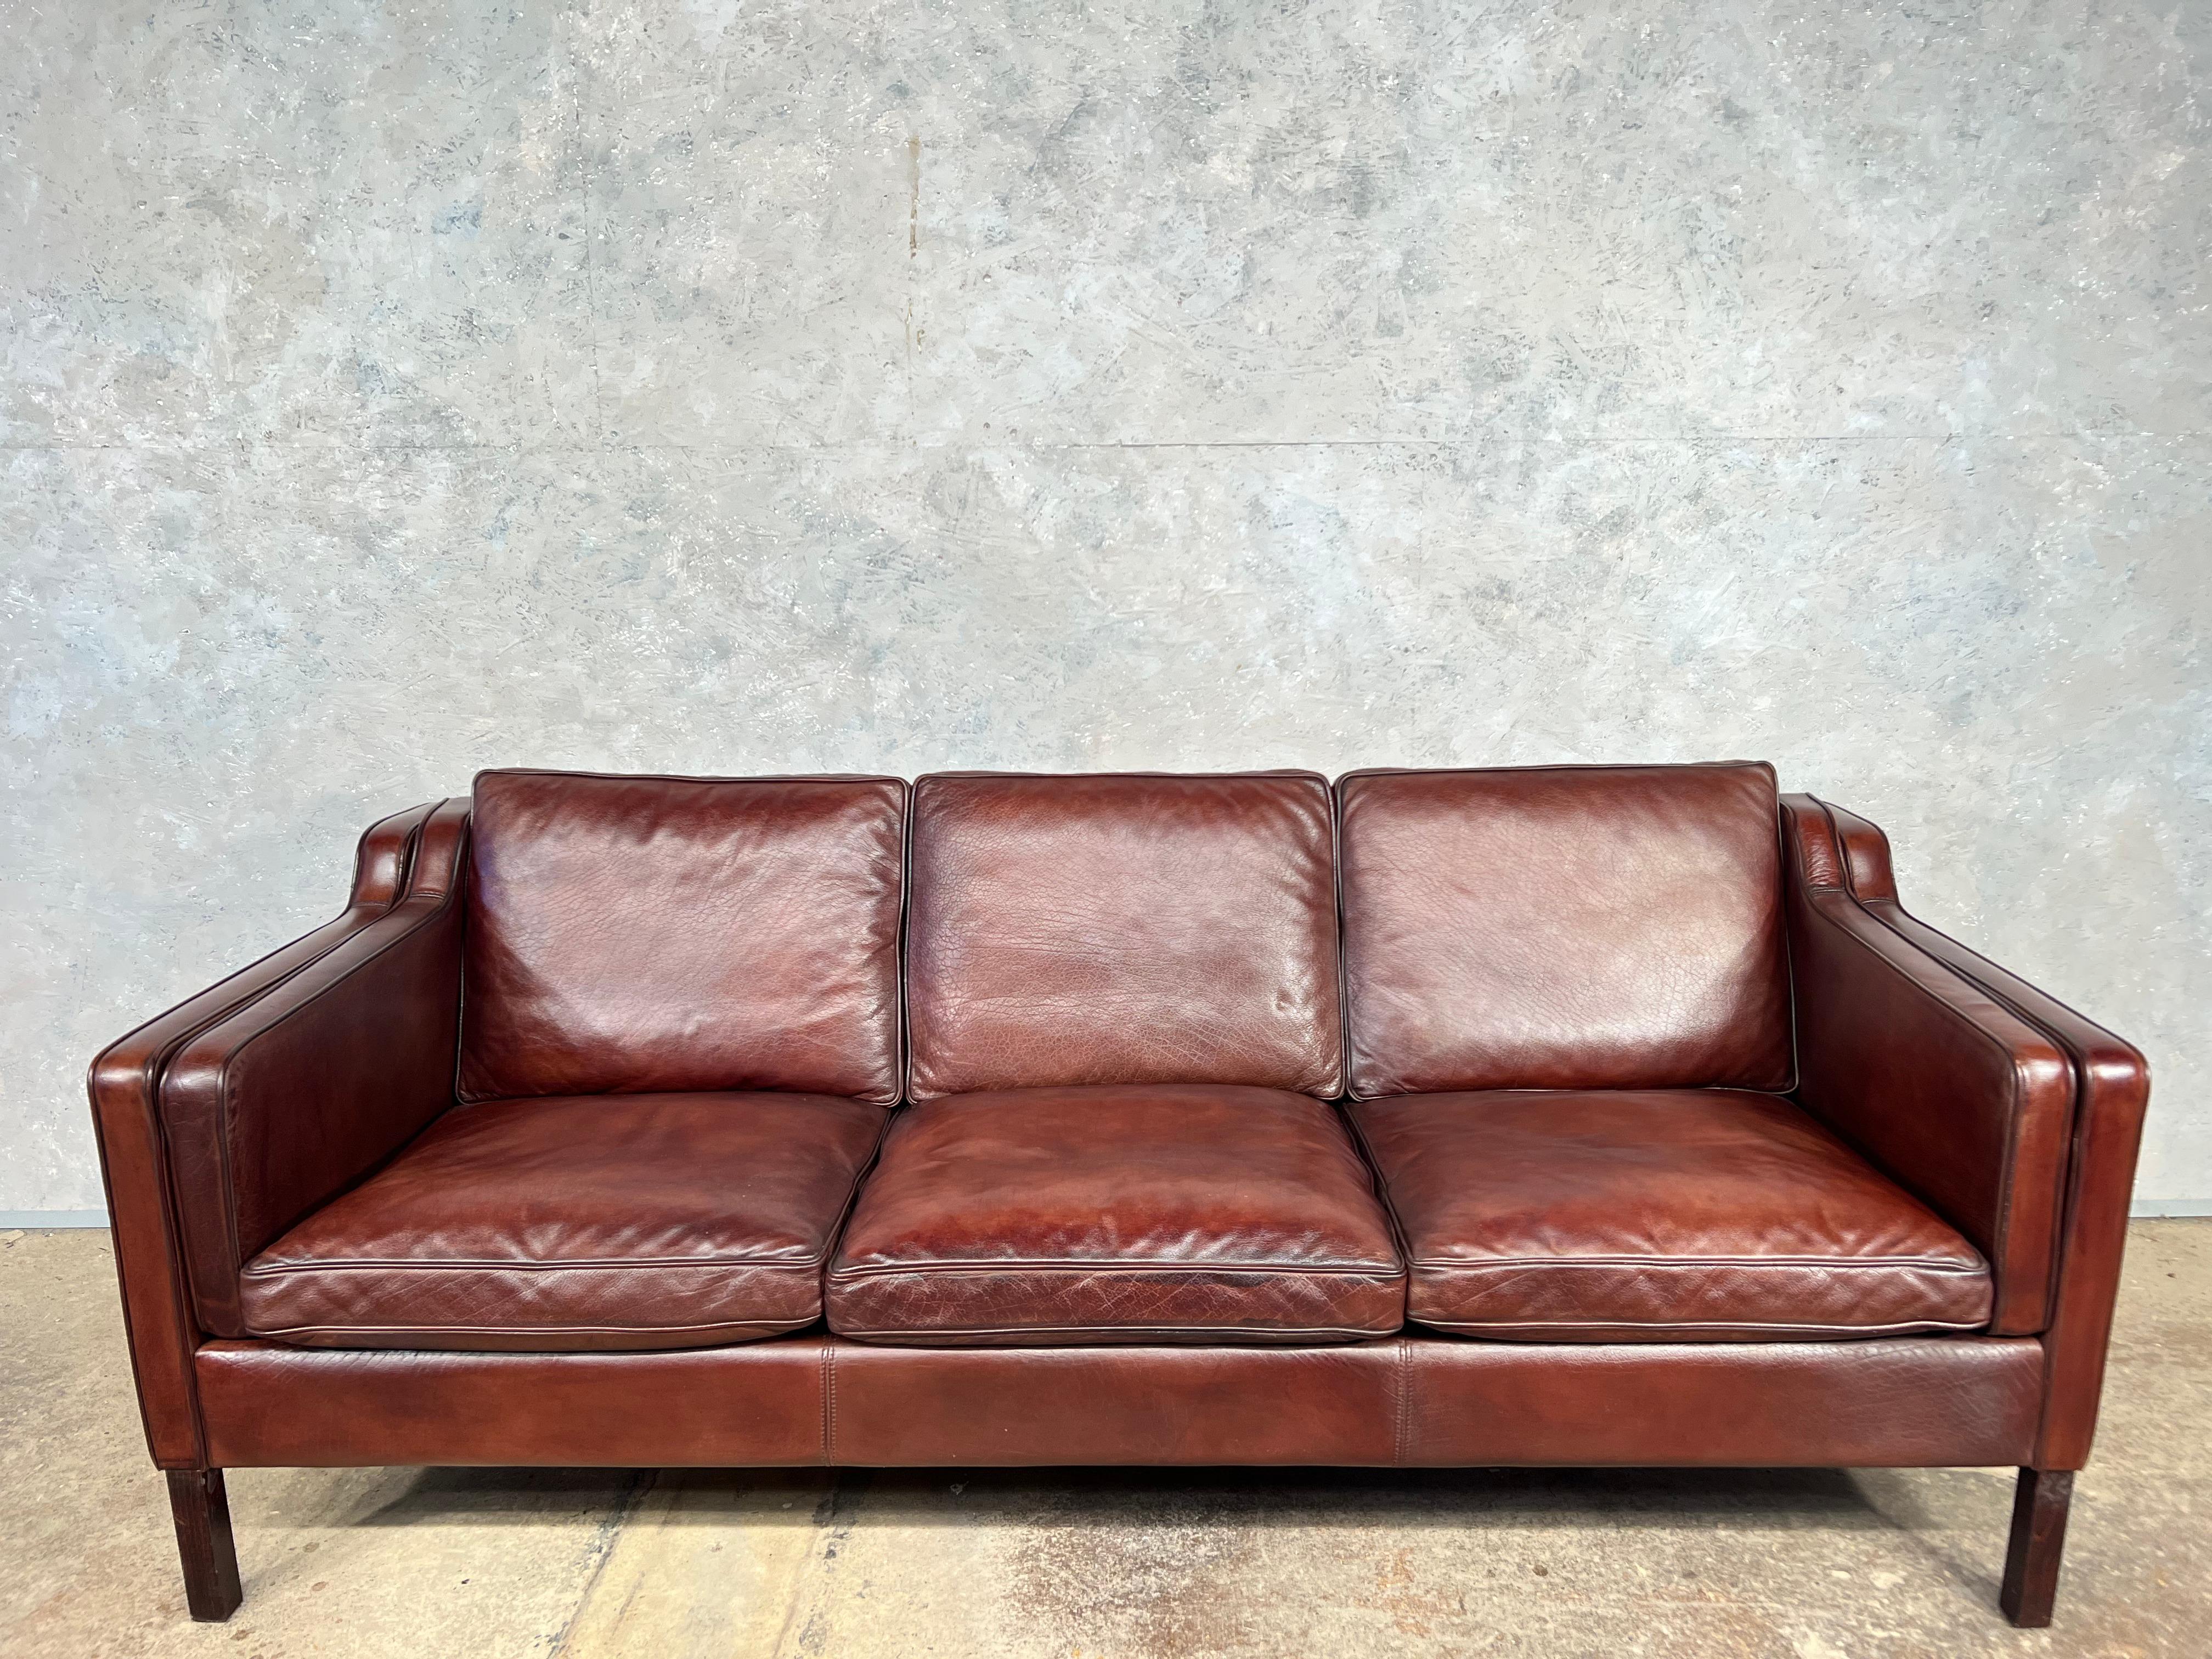 Vintage Danish 70s mid-century chestnut three seater leather sofa by Stouby.

In the Borge Mogensen style, fantastic quality with feather filled cushions, very stylish design with curved arms and back, in great condition, restored and hand dyed a